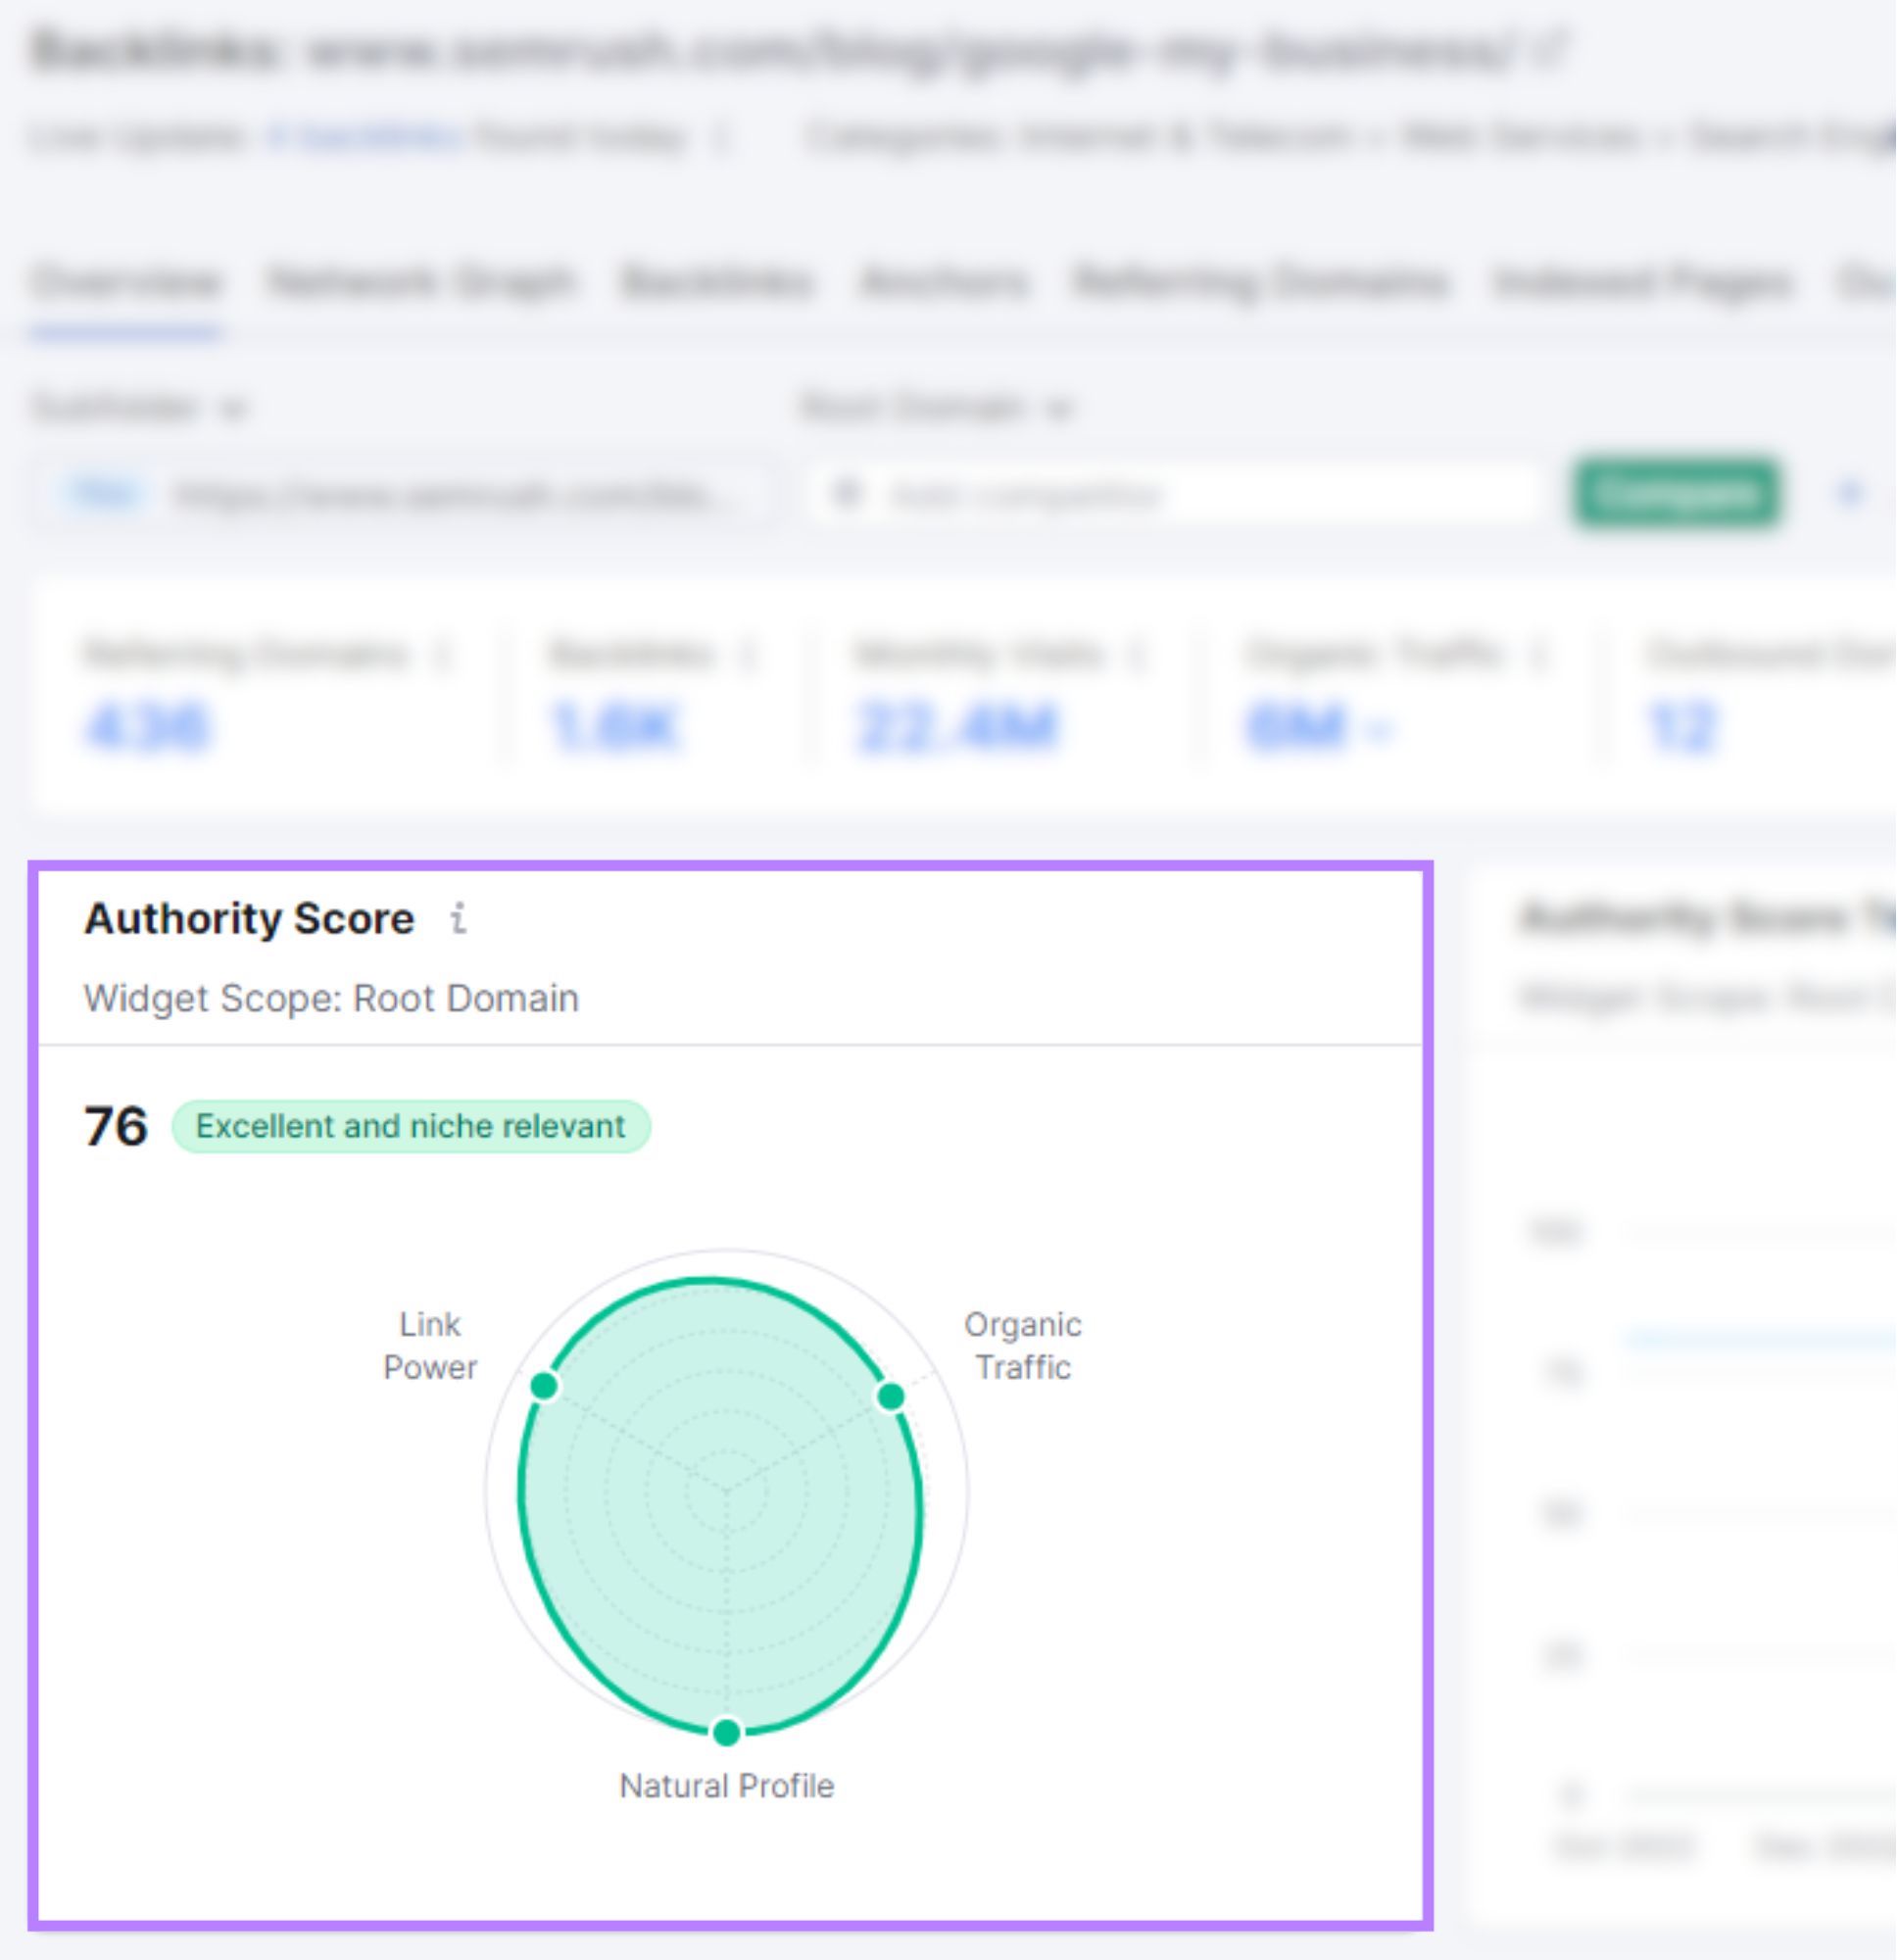 Authority Score metric section for Semrush's blog on Google My Business shows a score of 76